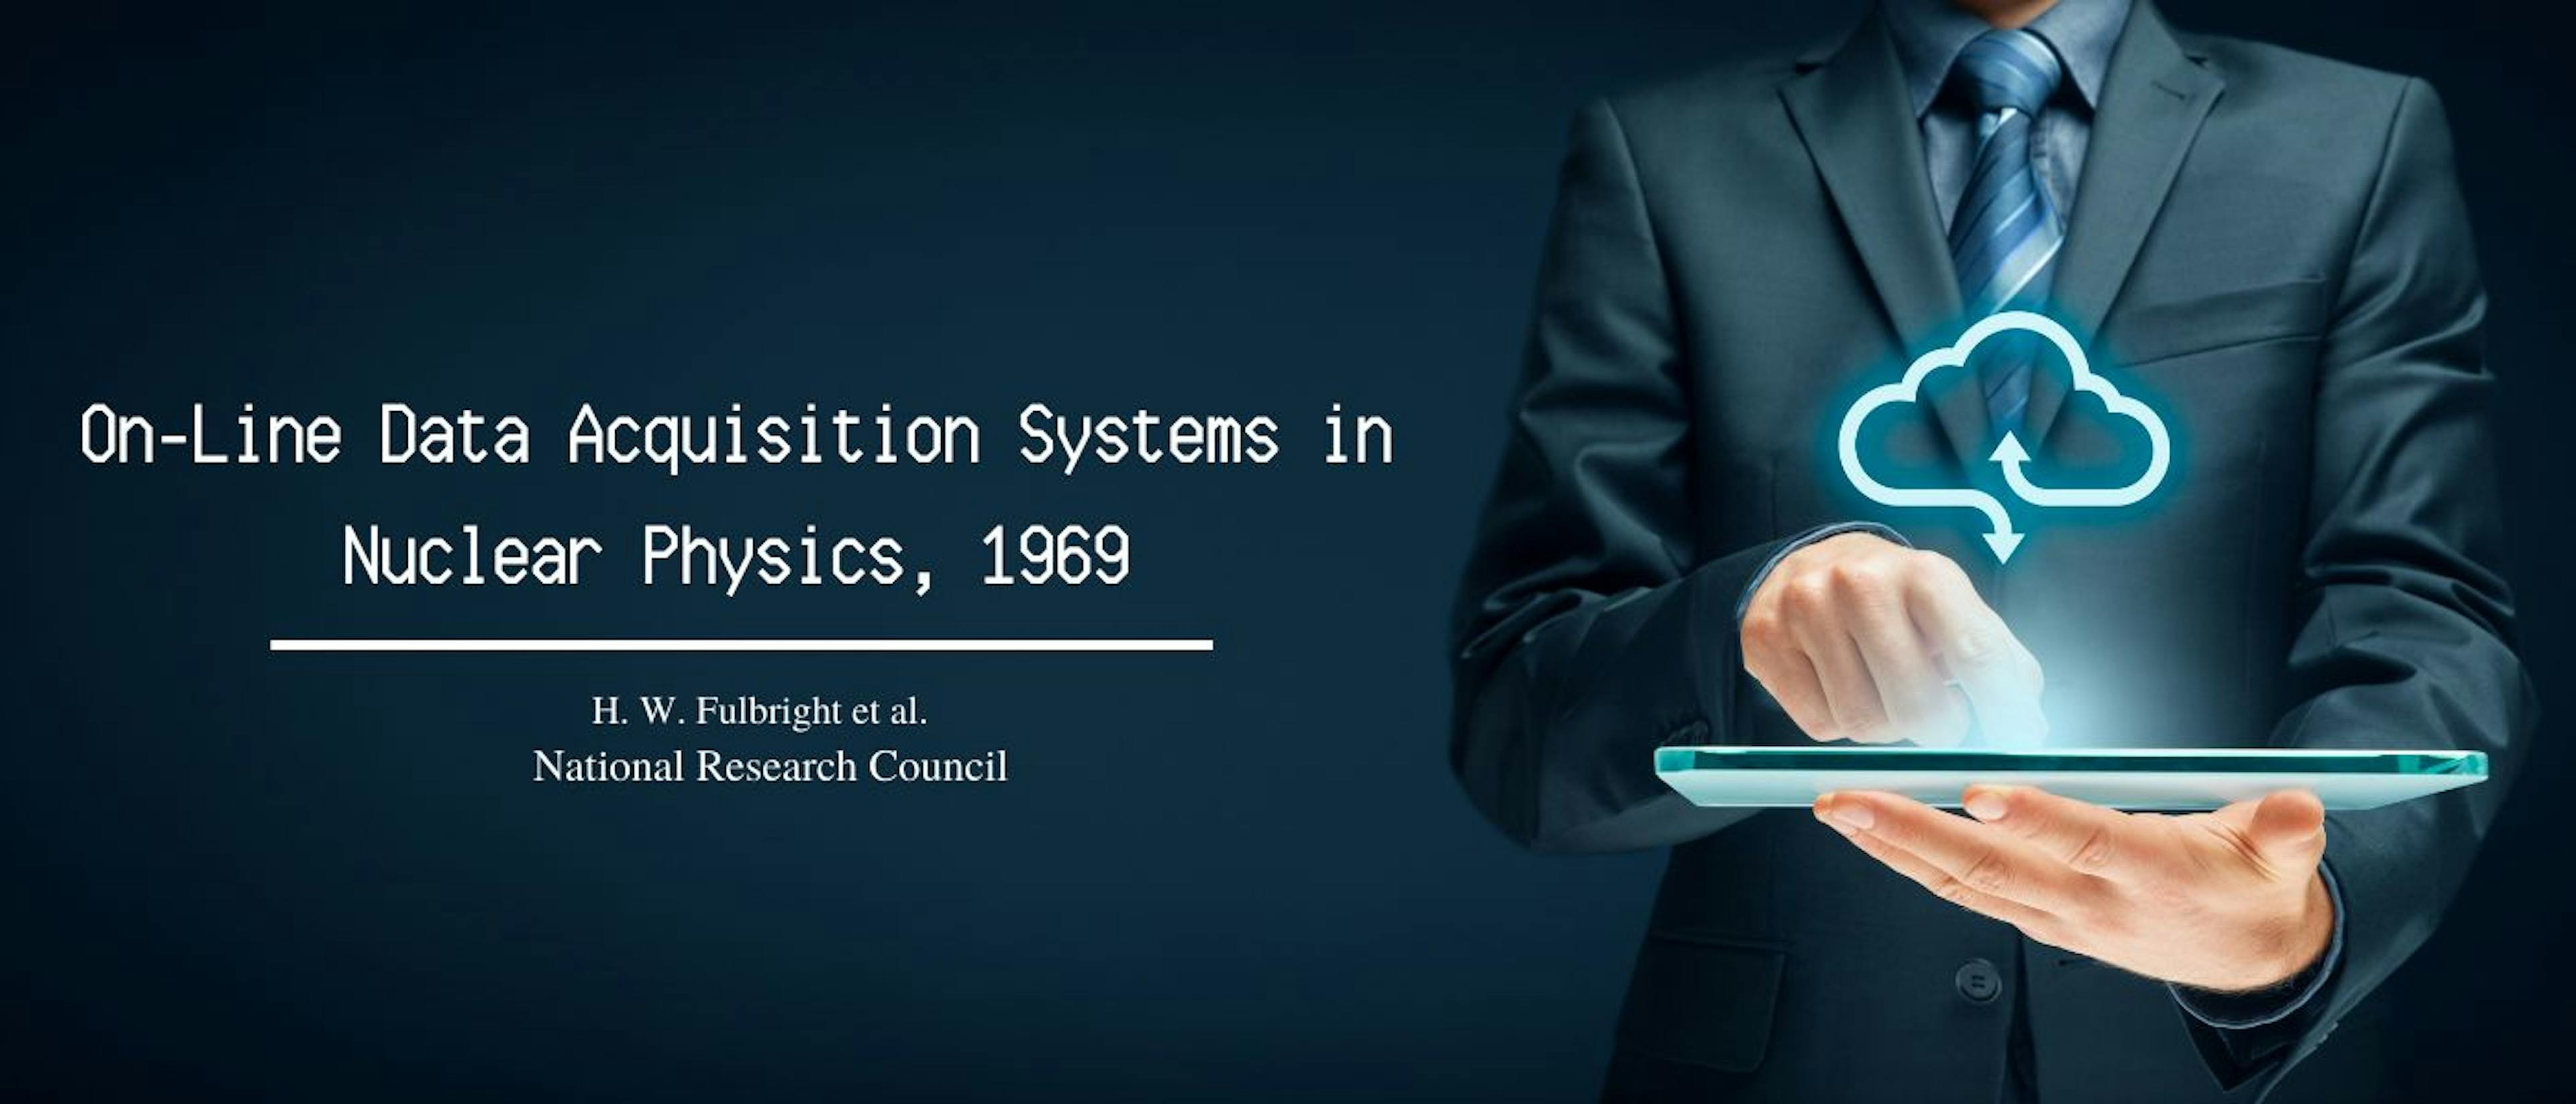 featured image - On-Line Data-Acquisition Systems in Nuclear Physics, 1969: Chapter 1 - THE COMPUTERS